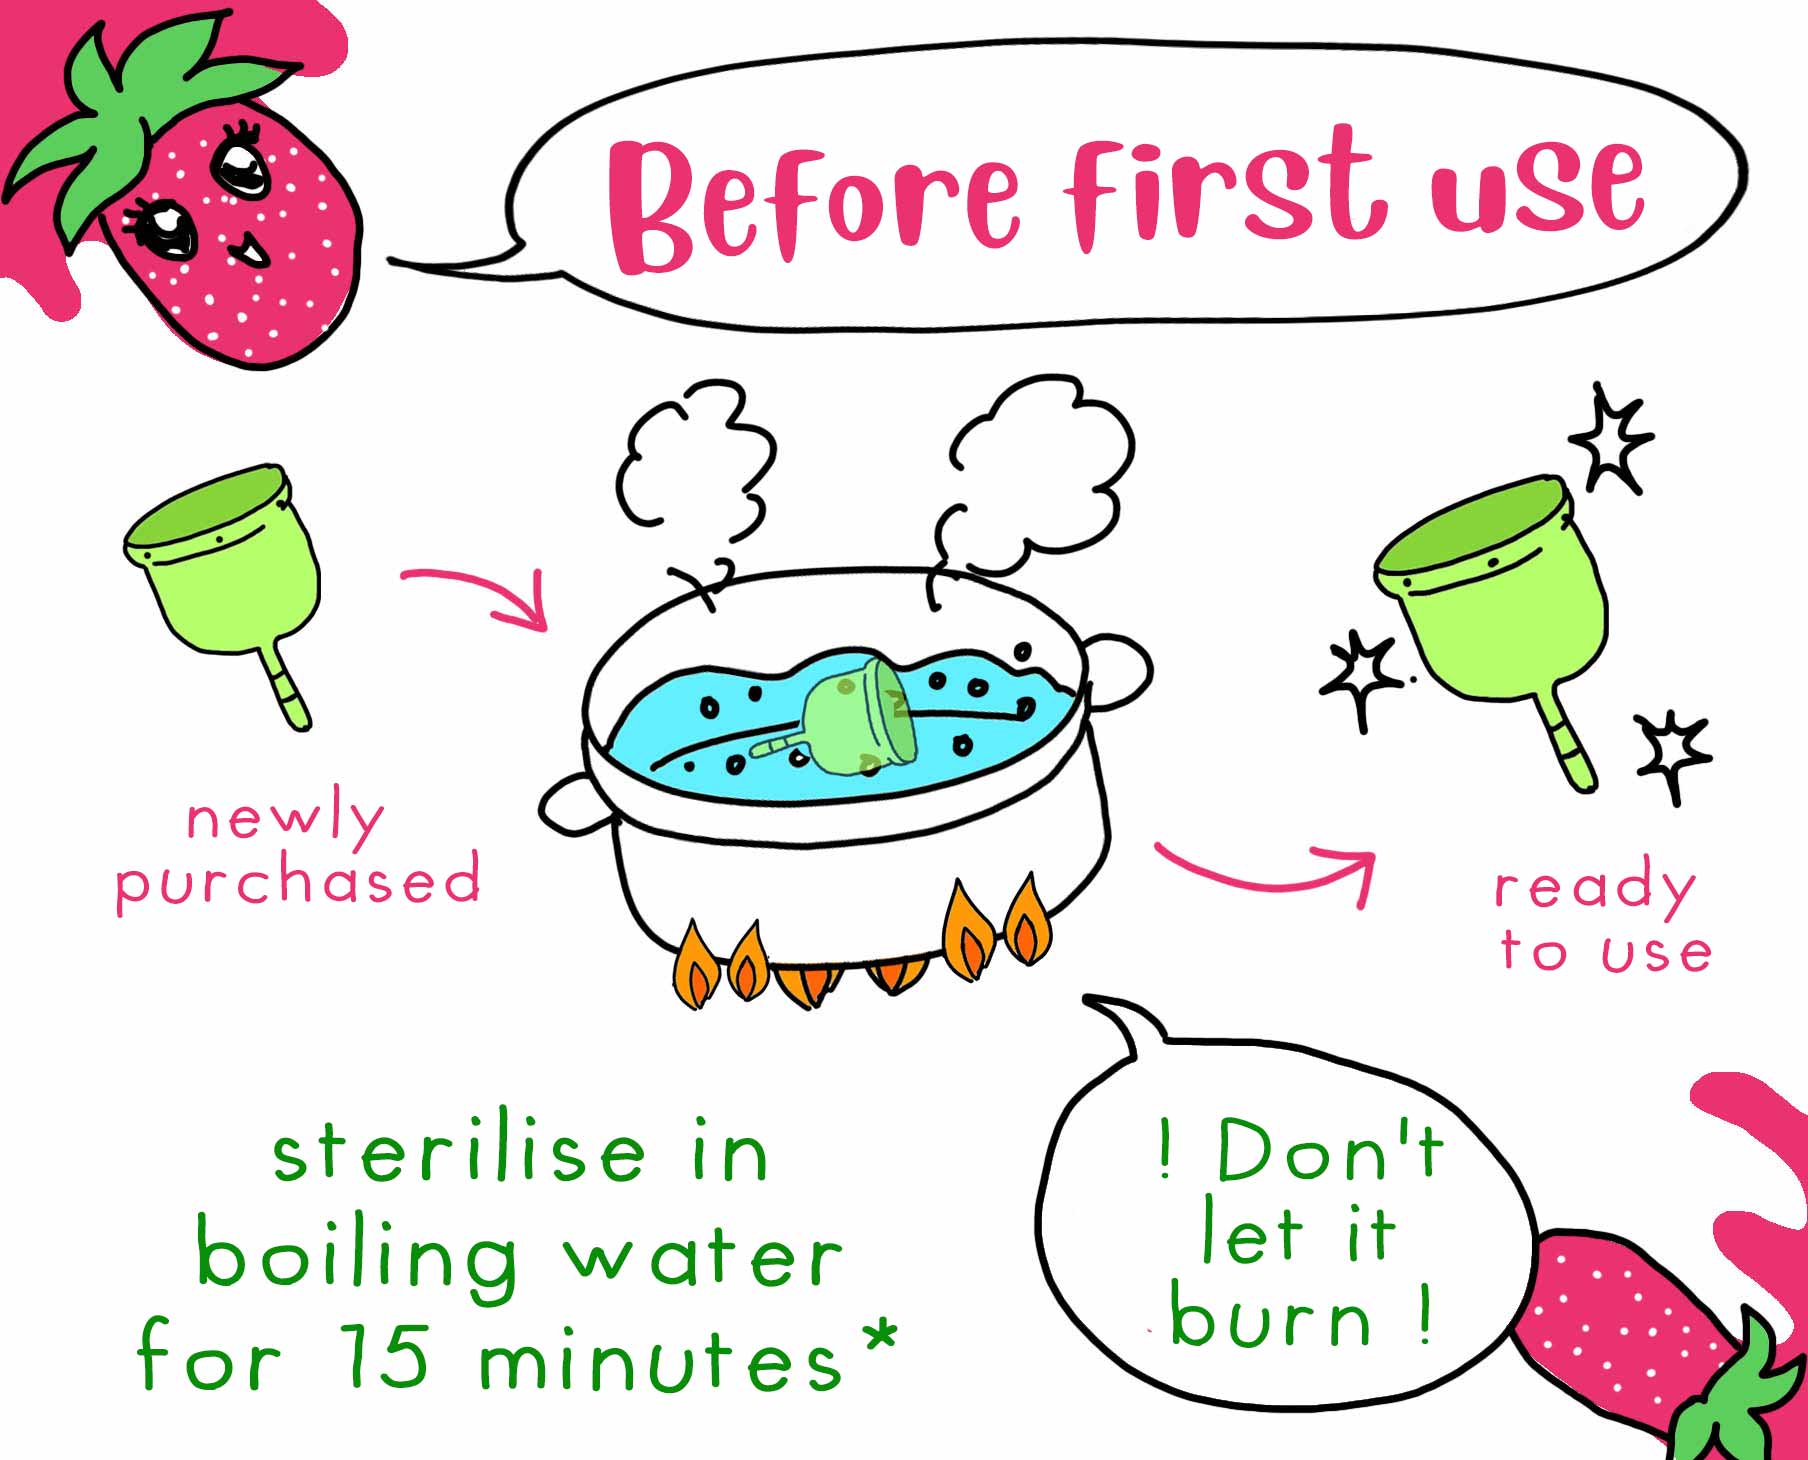 Before first use, newly purchased menstrual cup need to be sterilised in boiling water for 15 minutes, dont let it burn! Then it is ready to use